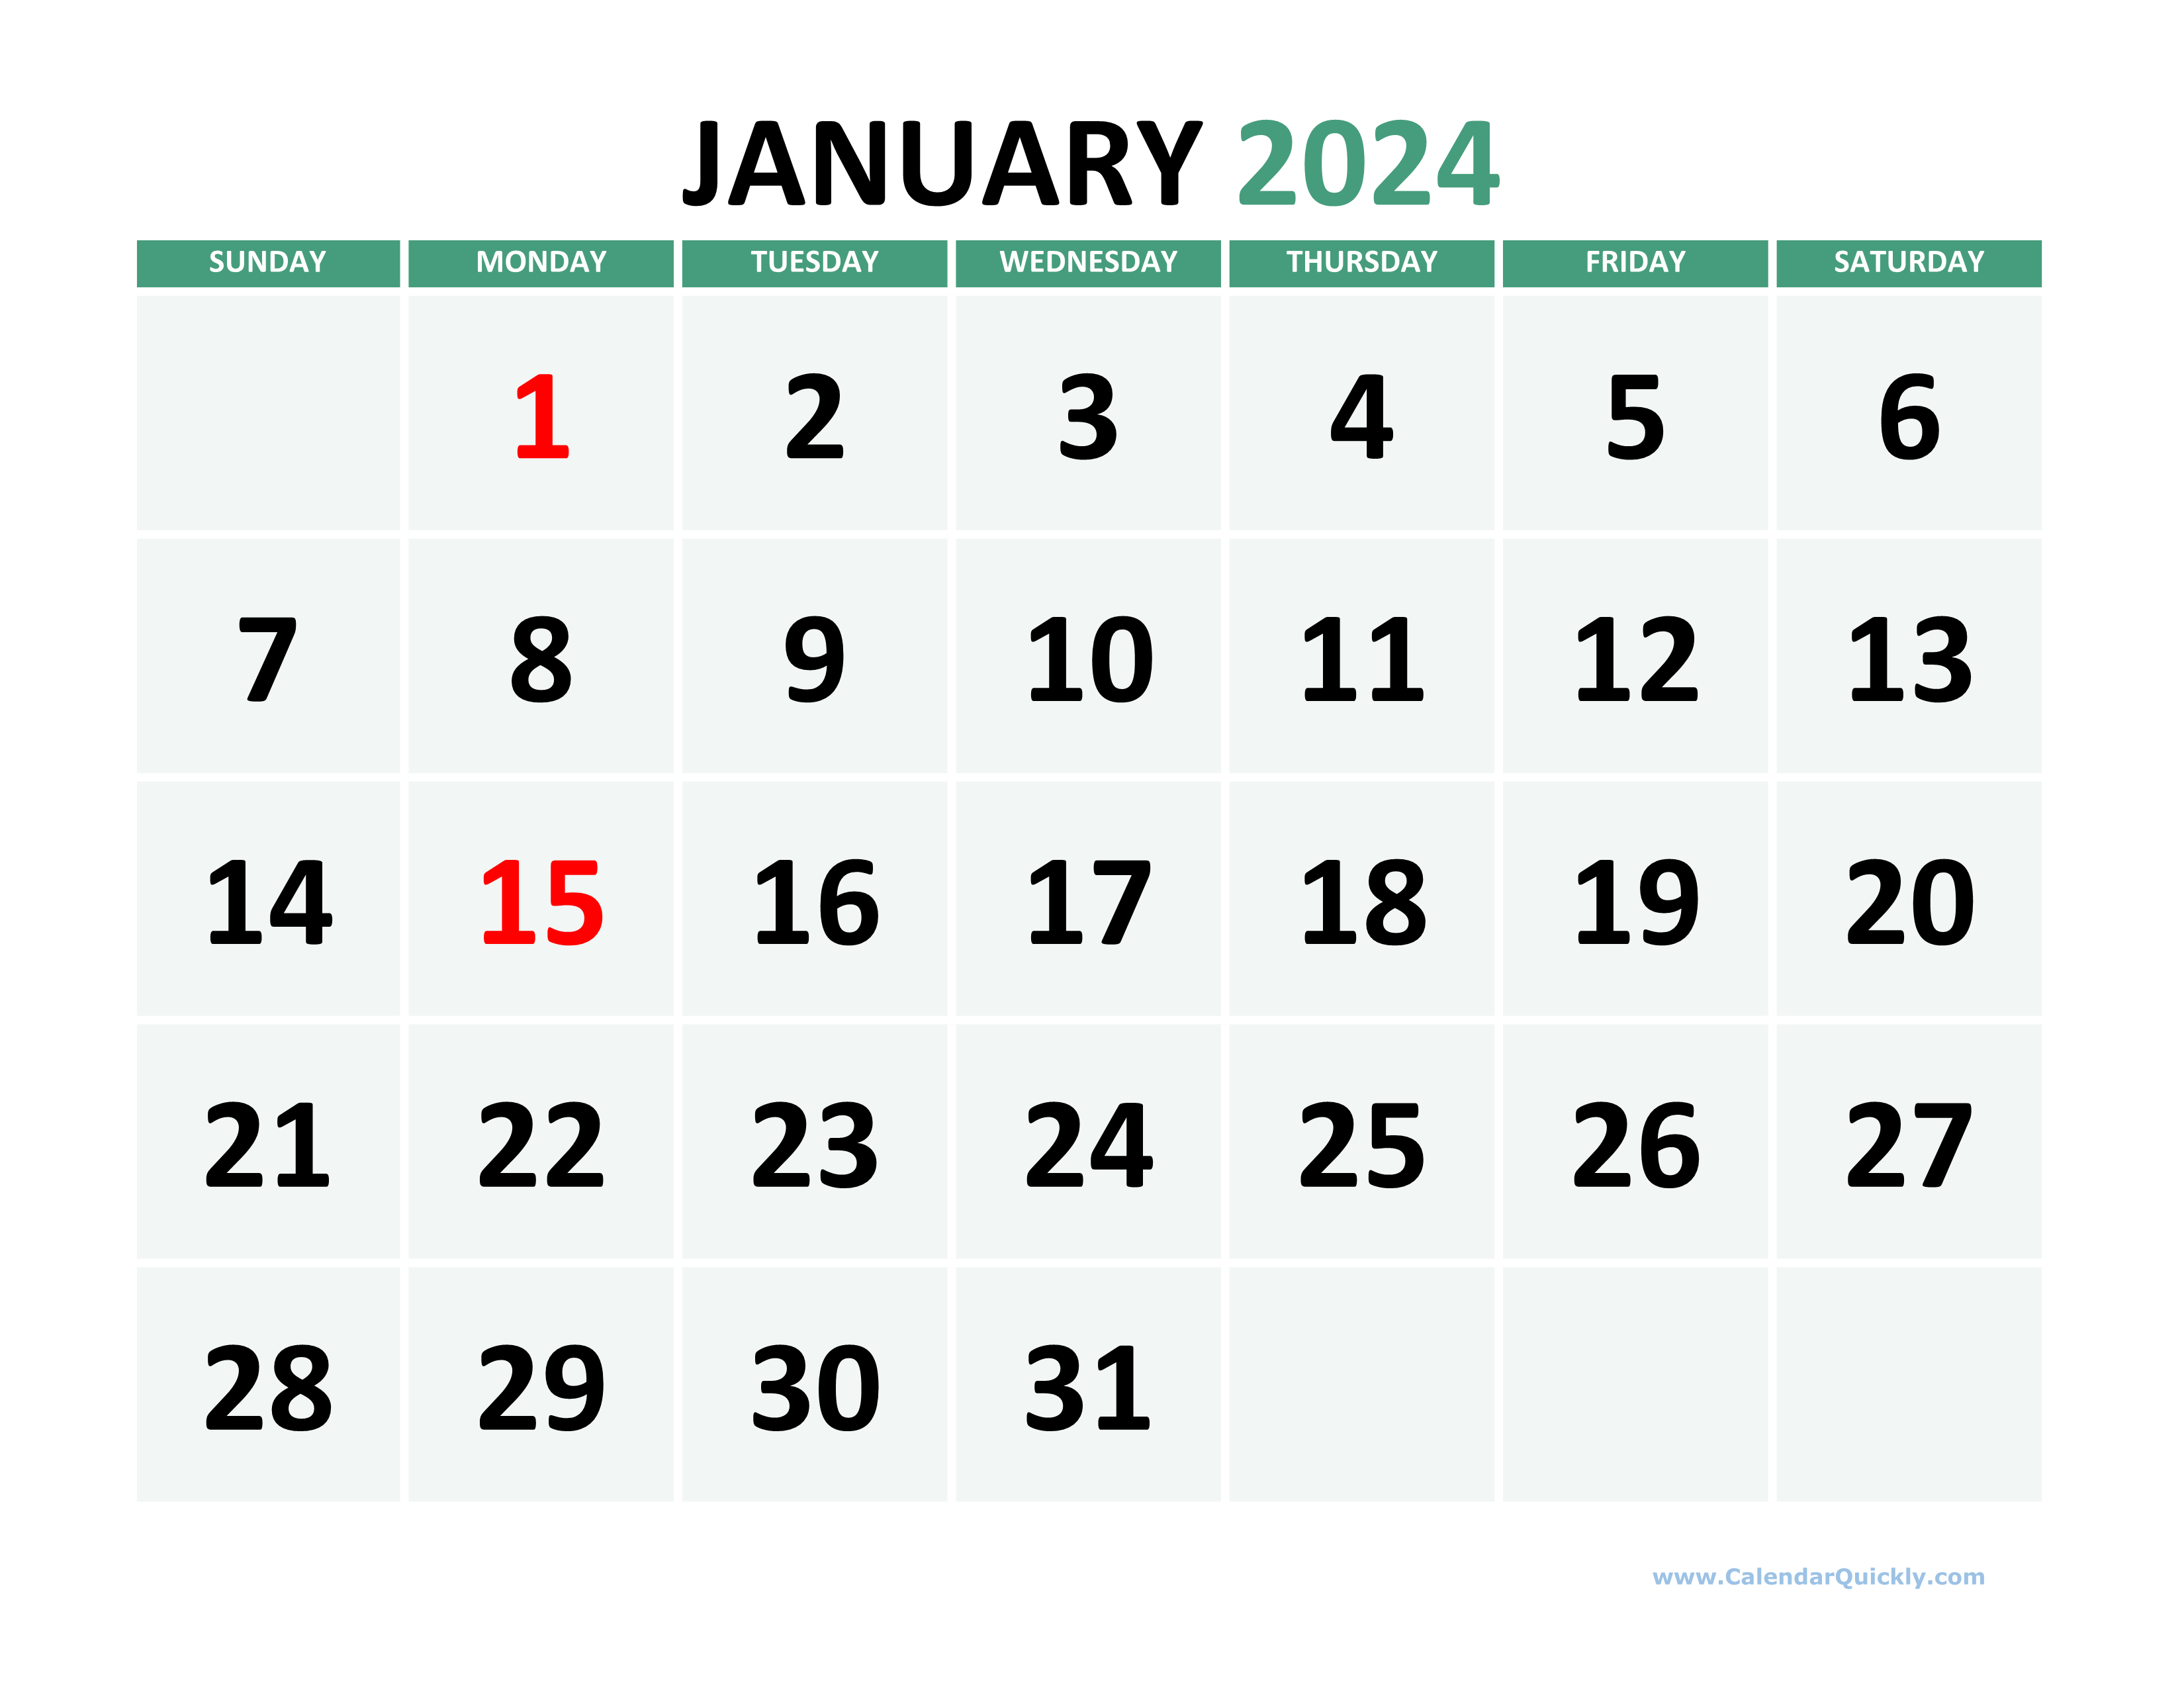 2 year calendar 2024 and 2024 latest ultimate most popular review of